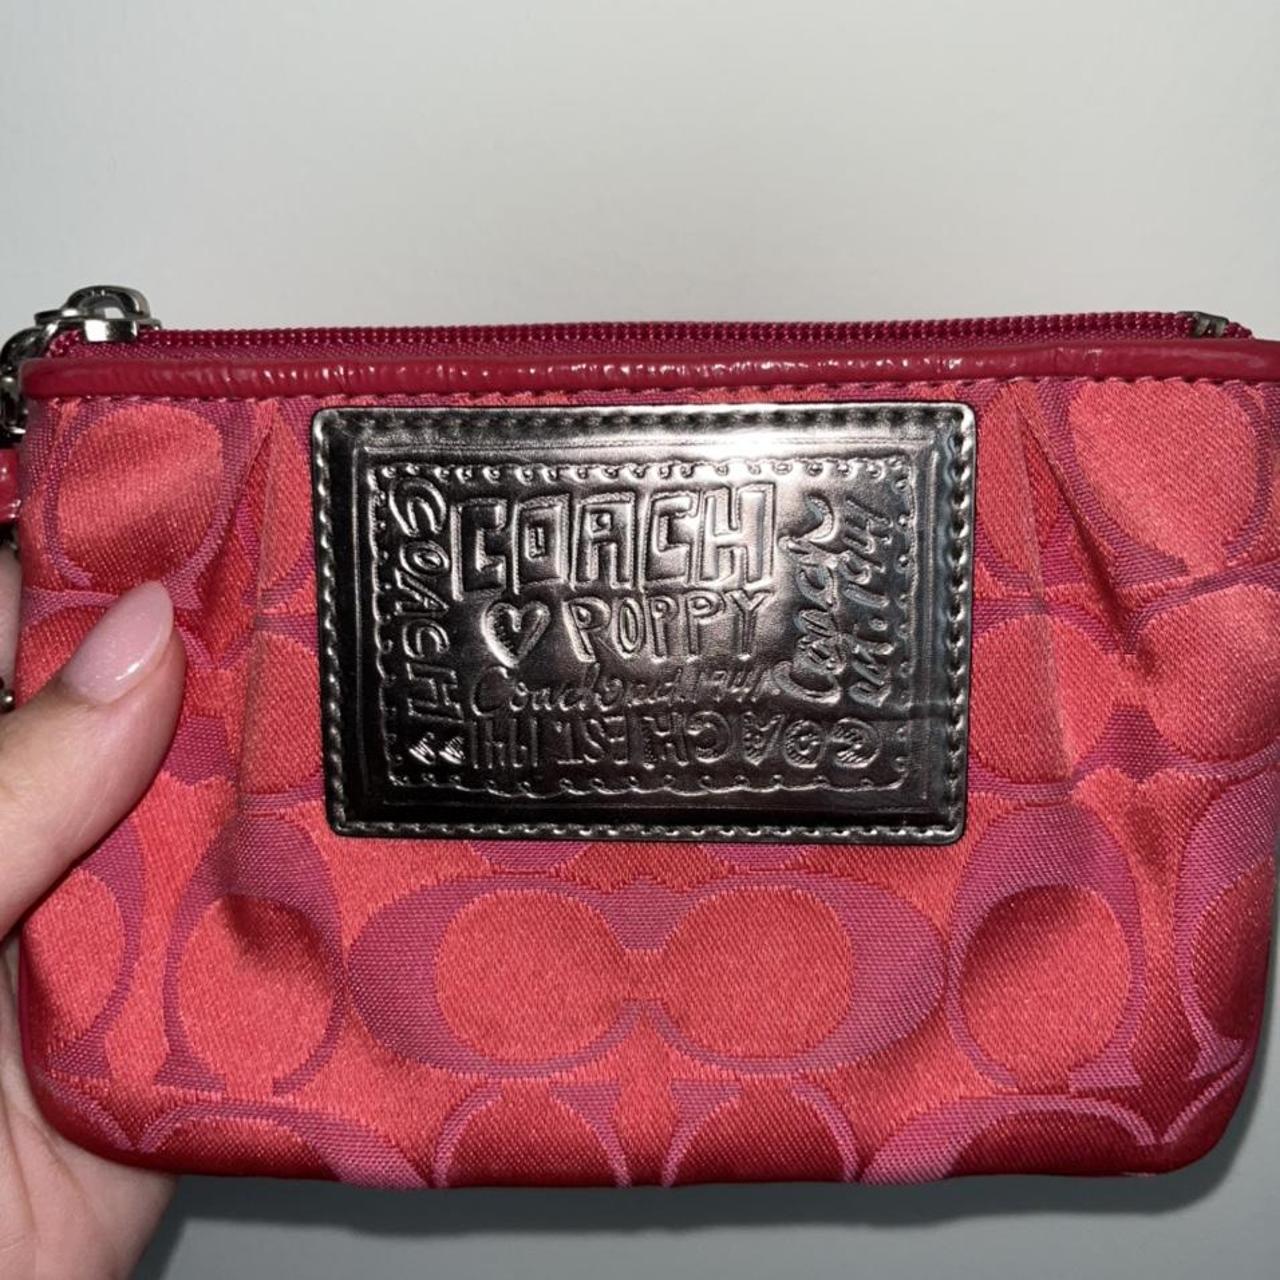 Collectible COACH POPPY Handbag in United States